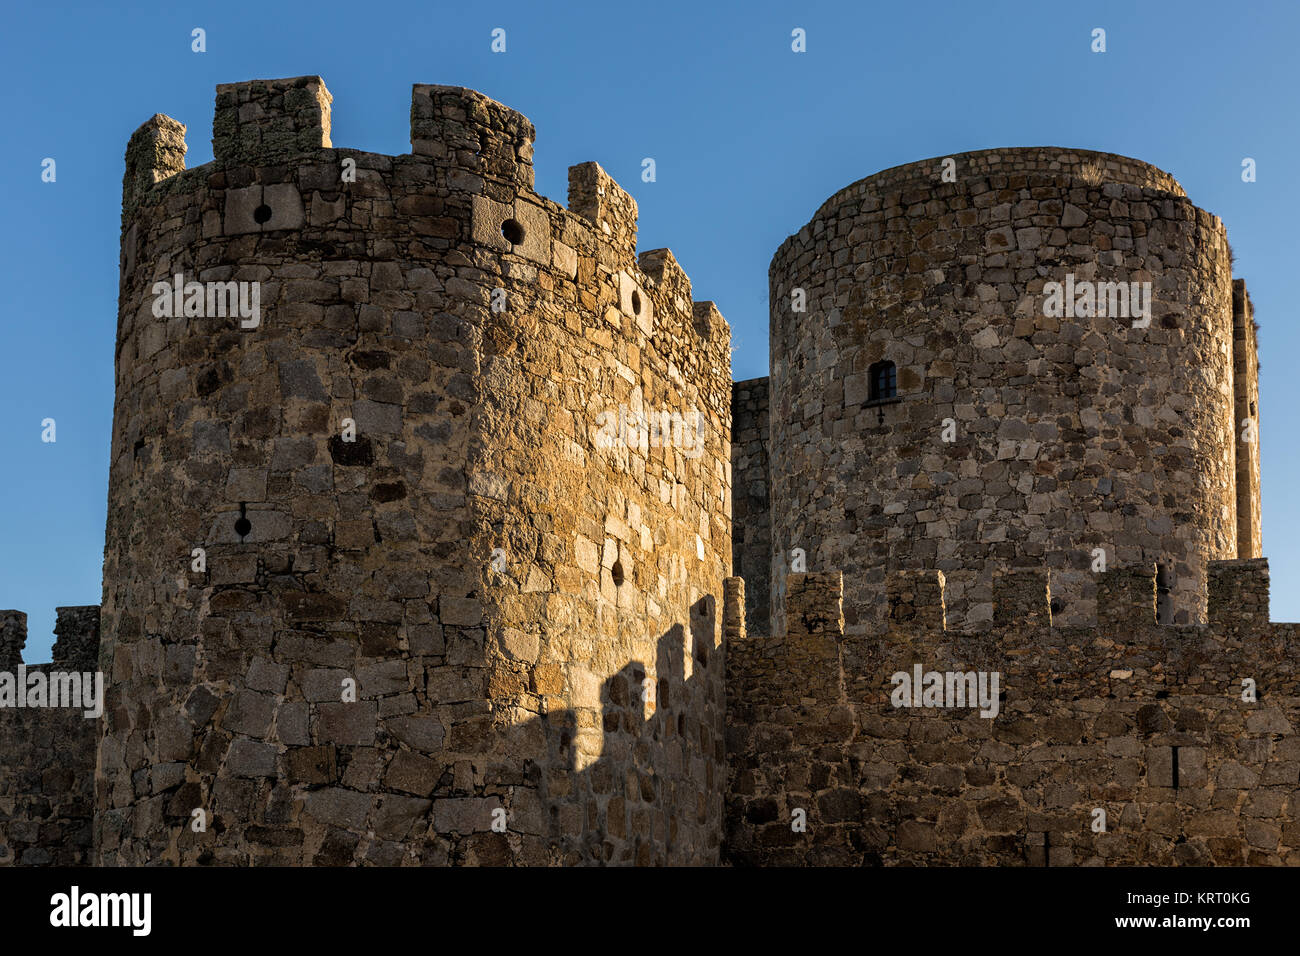 Towers and walls in the castle of Puente del Congosto. Spain. Stock Photo